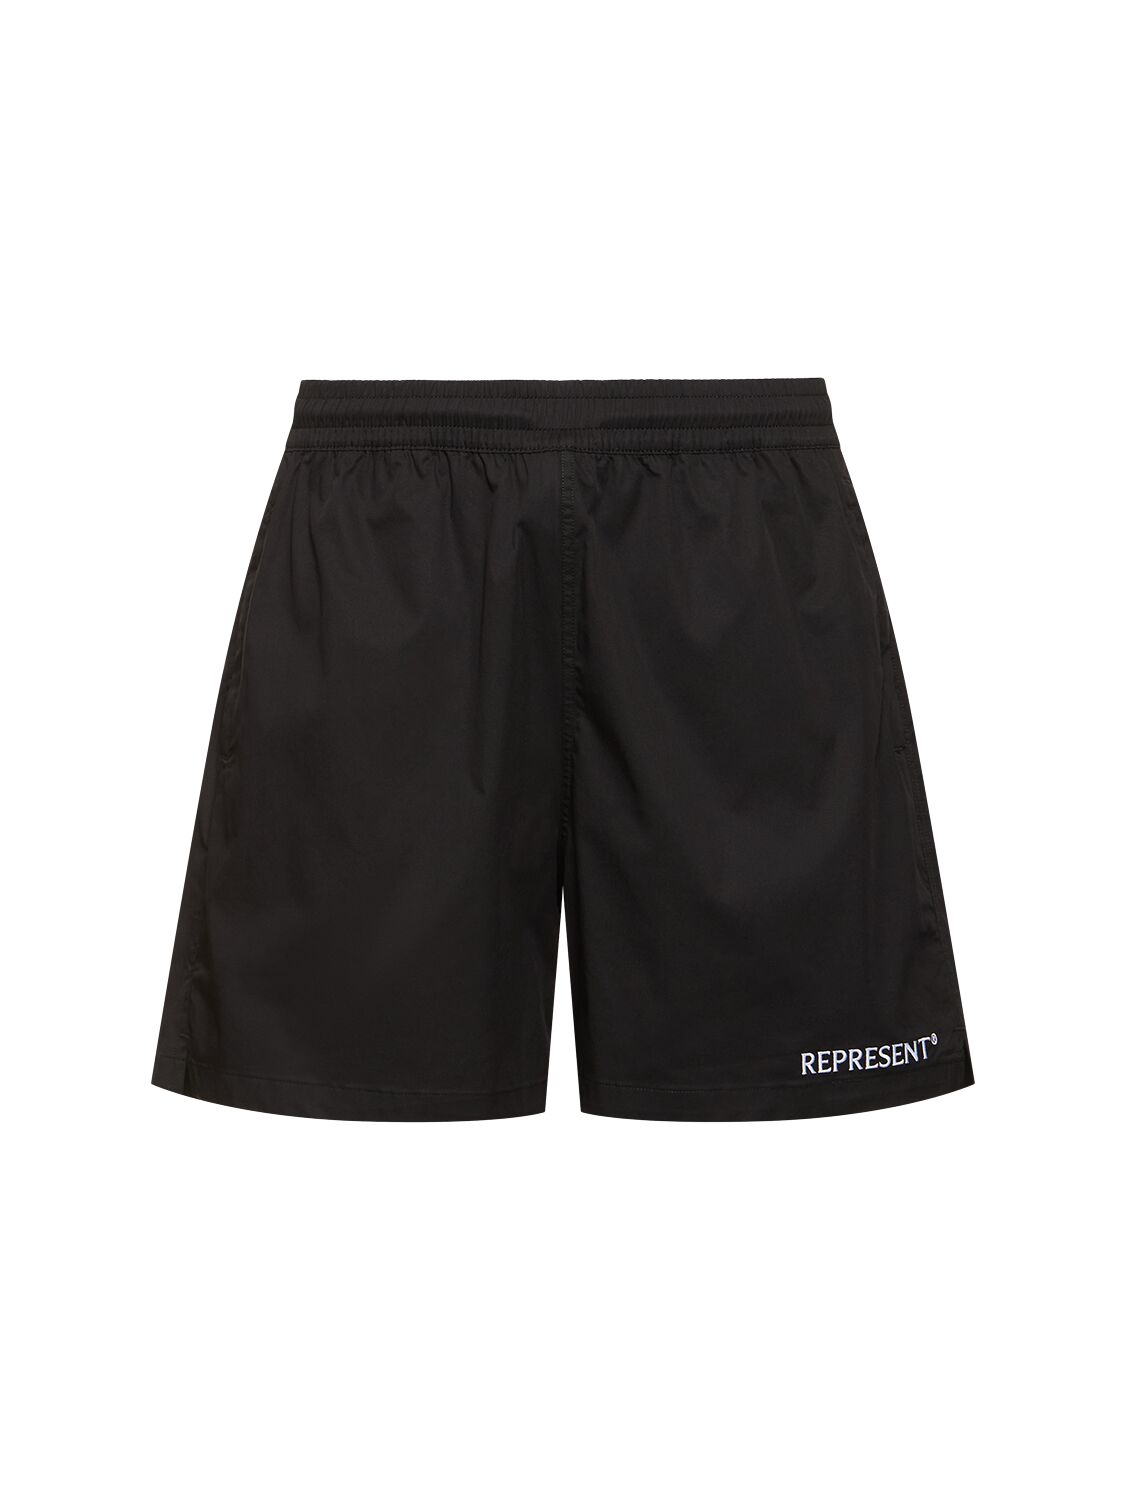 Image of Represent Cotton Blend Shorts